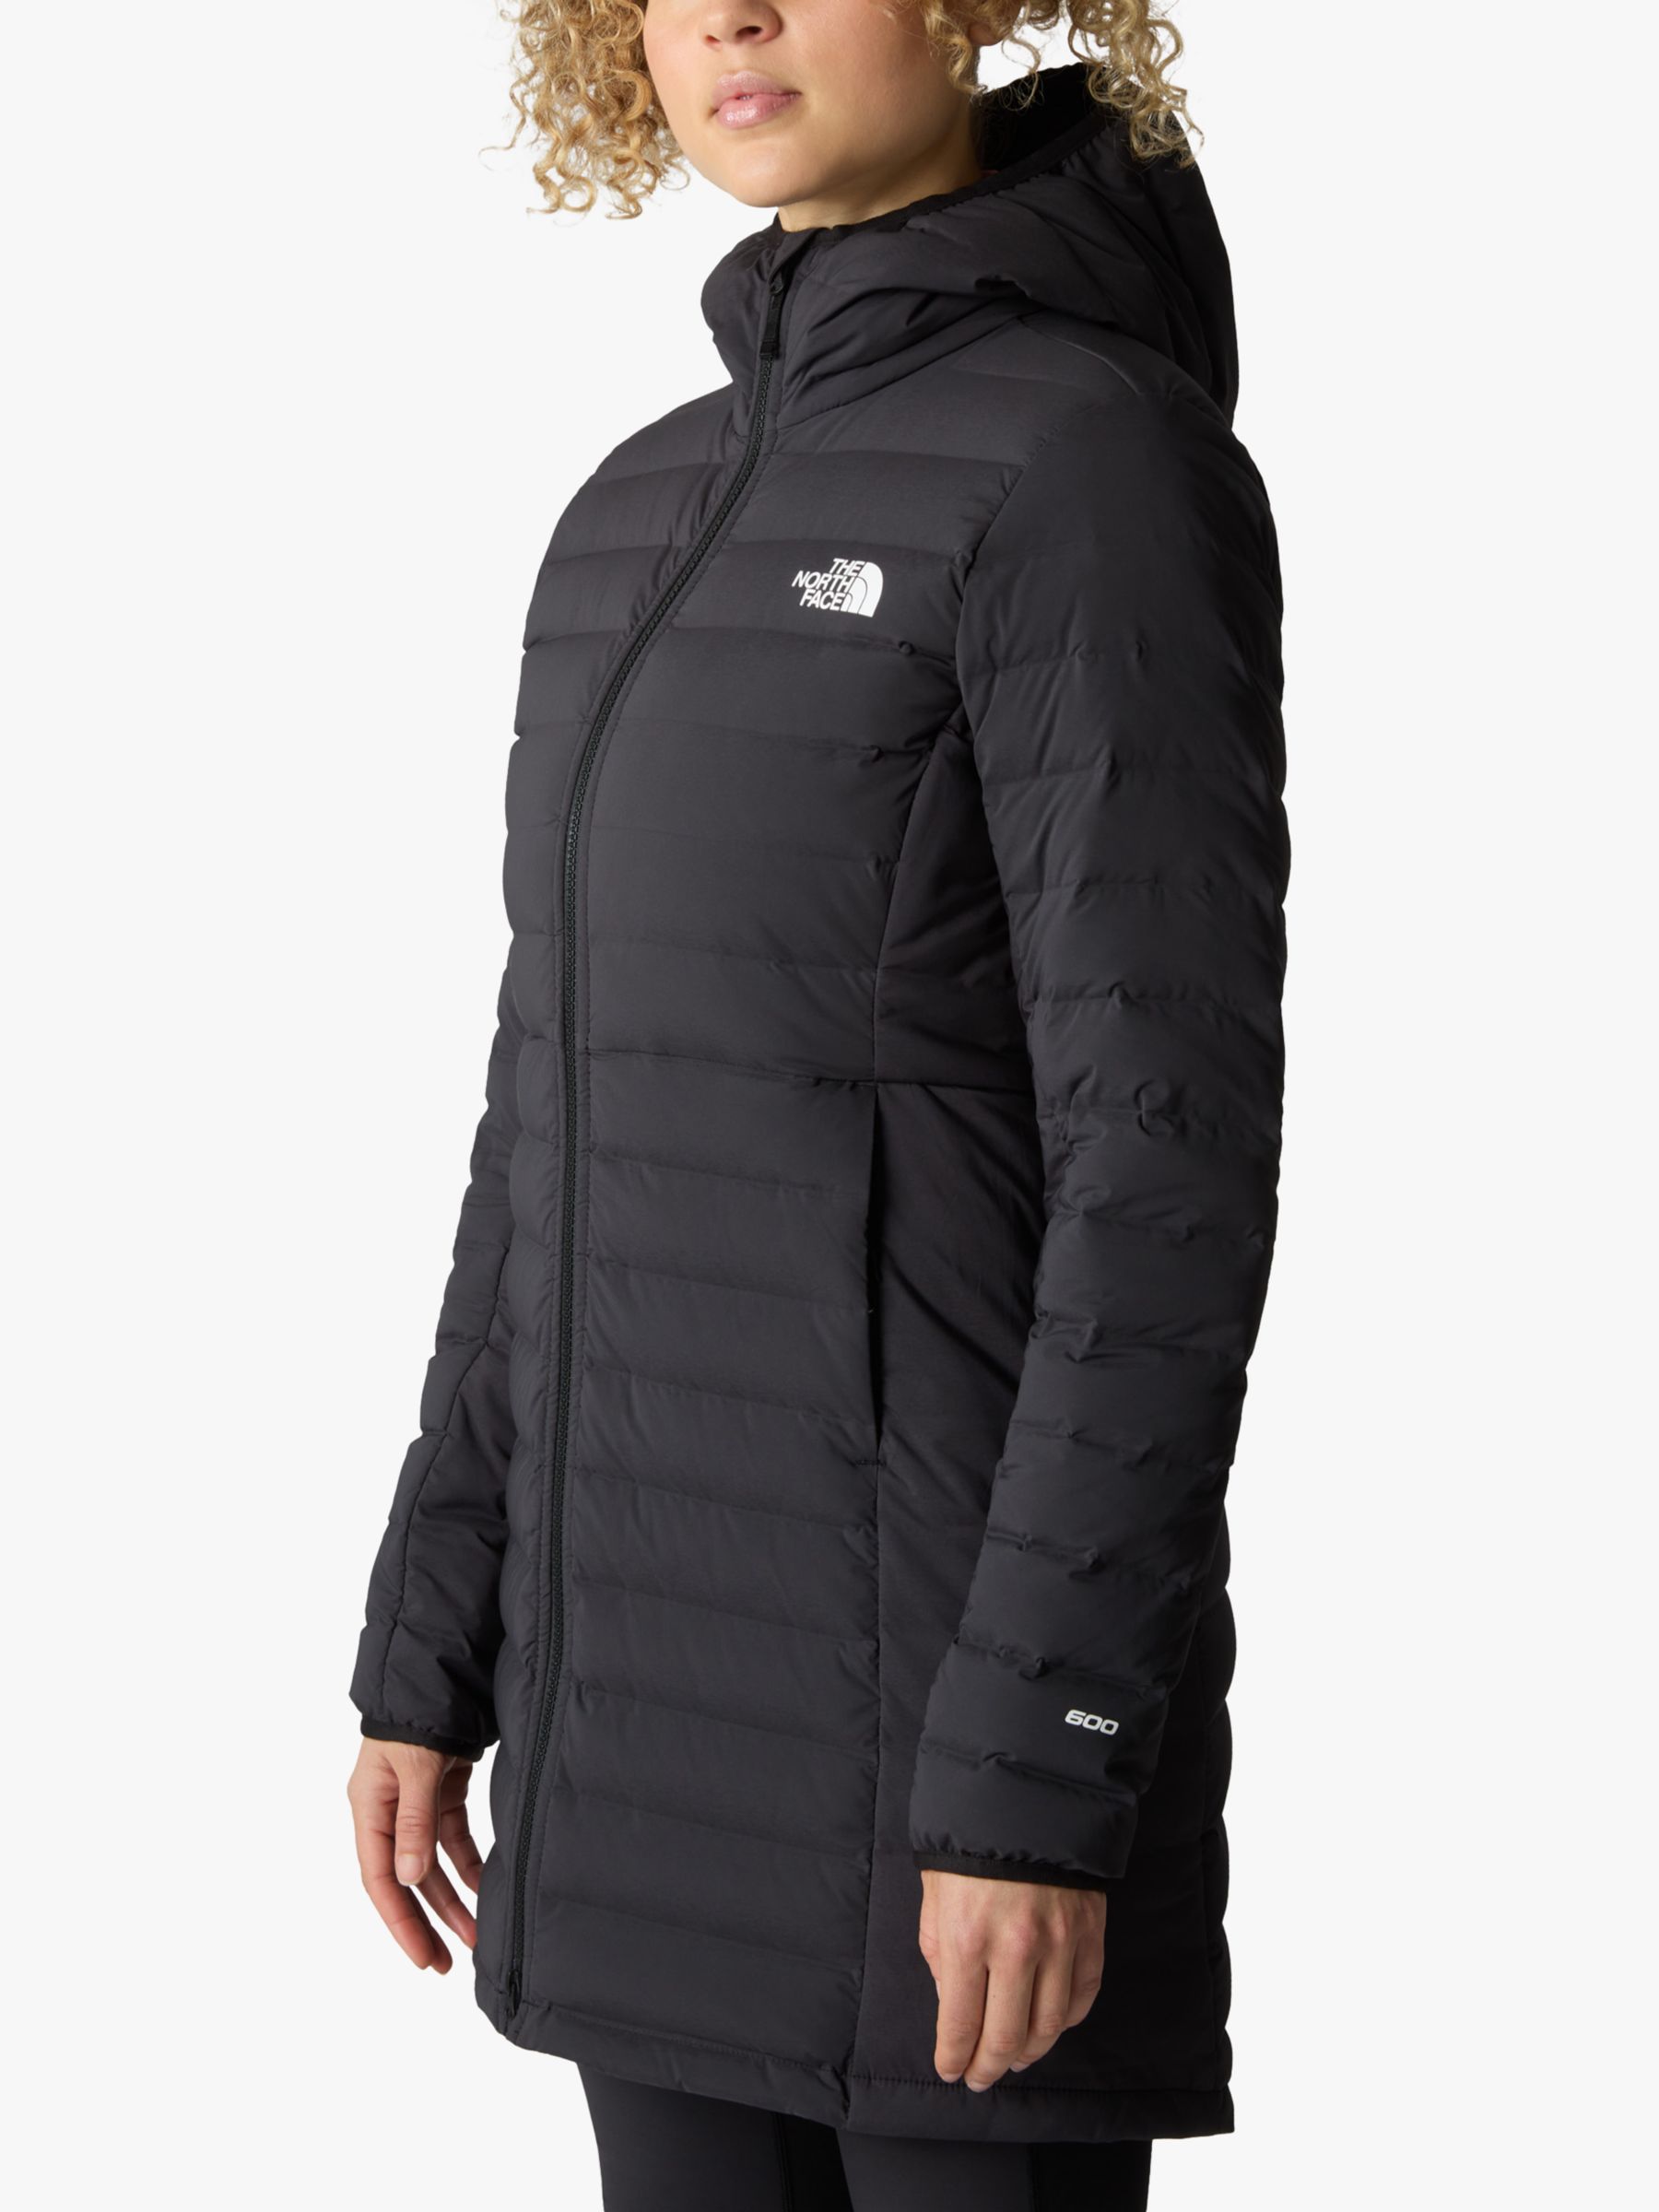 The North Face Belleview Stretch Down Women's Parka Jacket